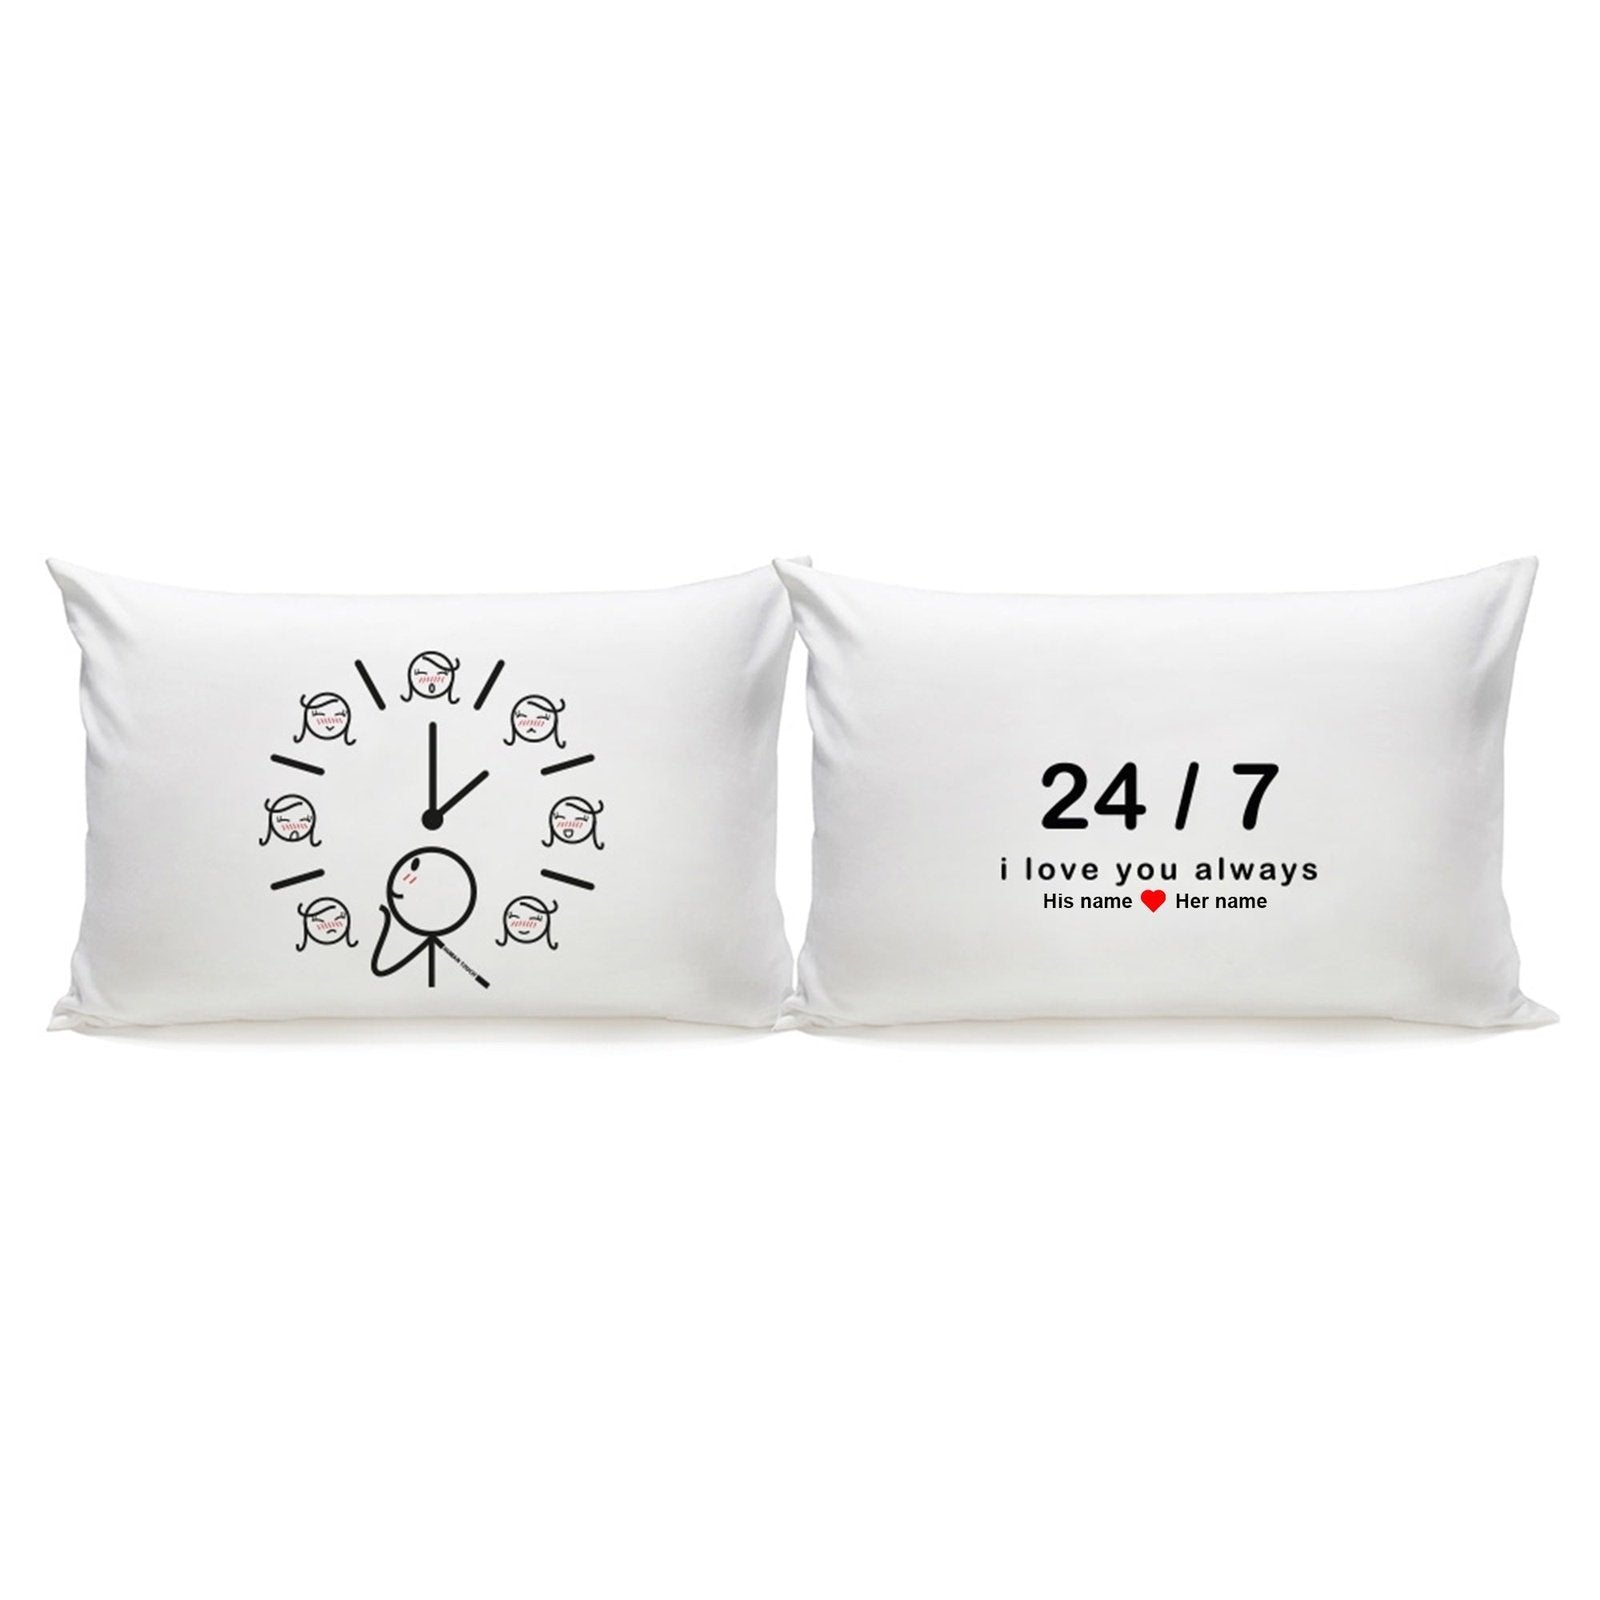 Celebrate love and time with adorable couple pillows featuring a clock design, perfect for anniversary or gift for him/her.